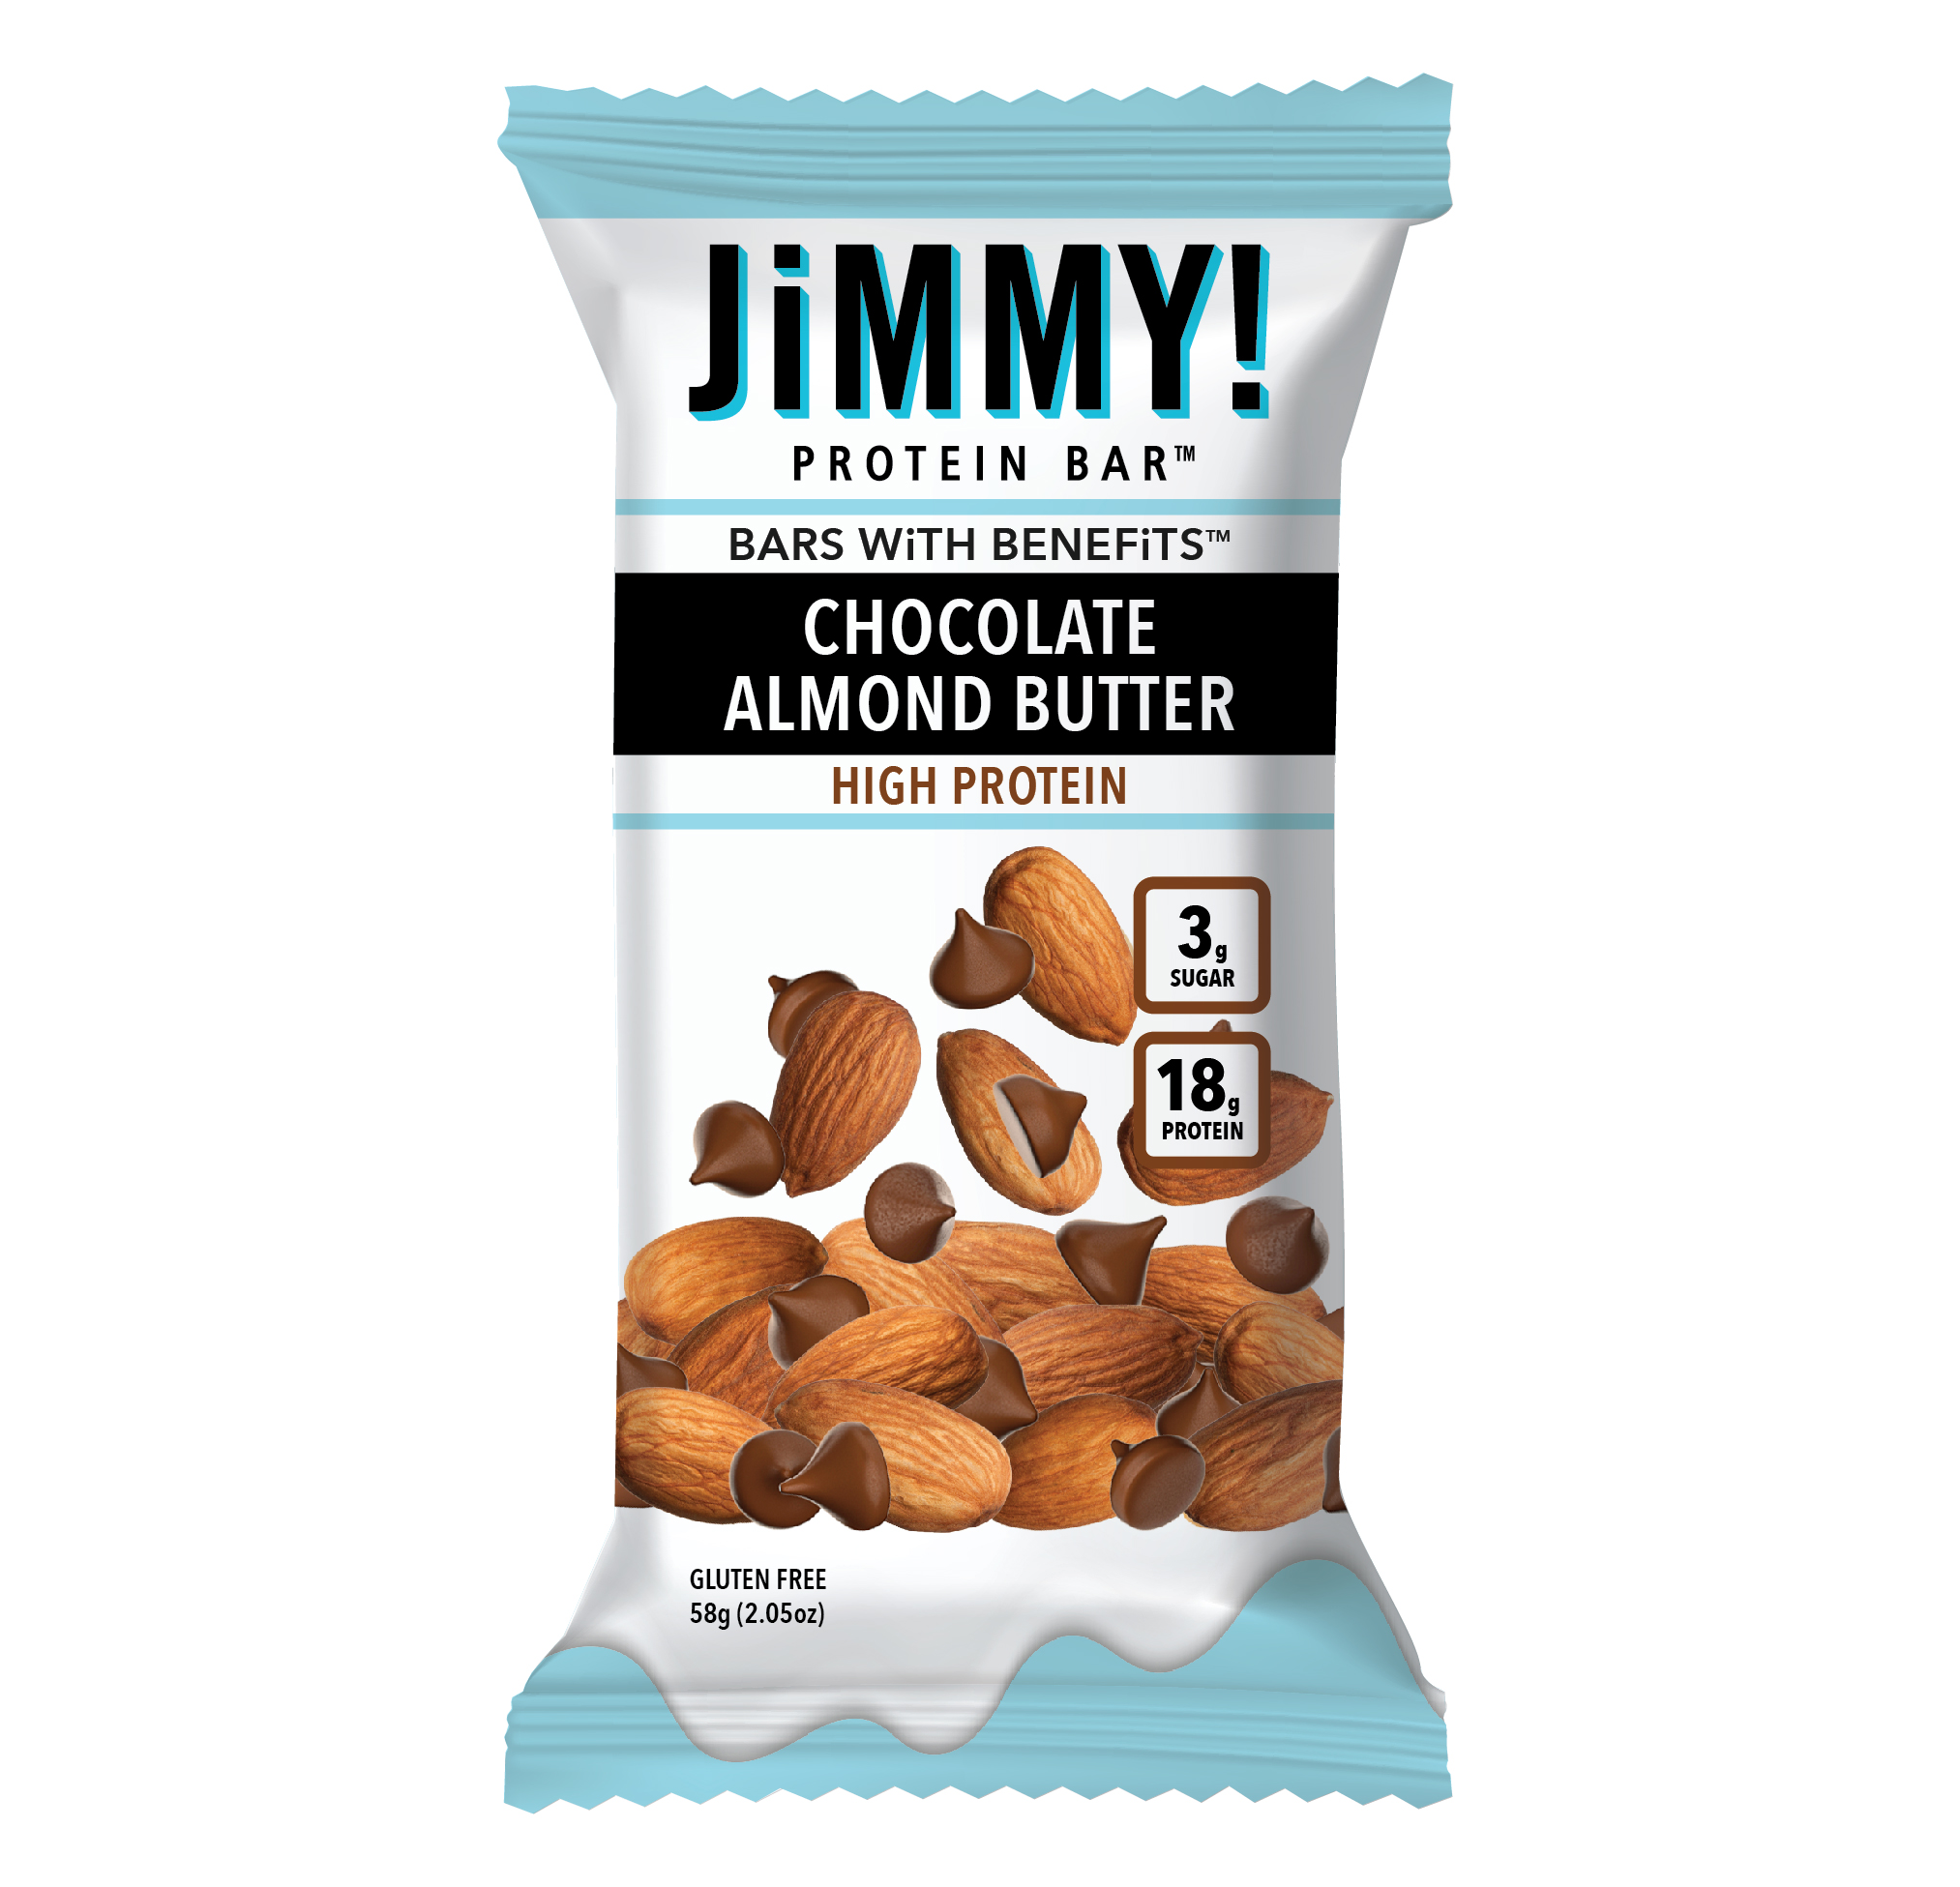 JiMMY! Chocolate Almond Butter 12 innerpacks per case 2.1 oz